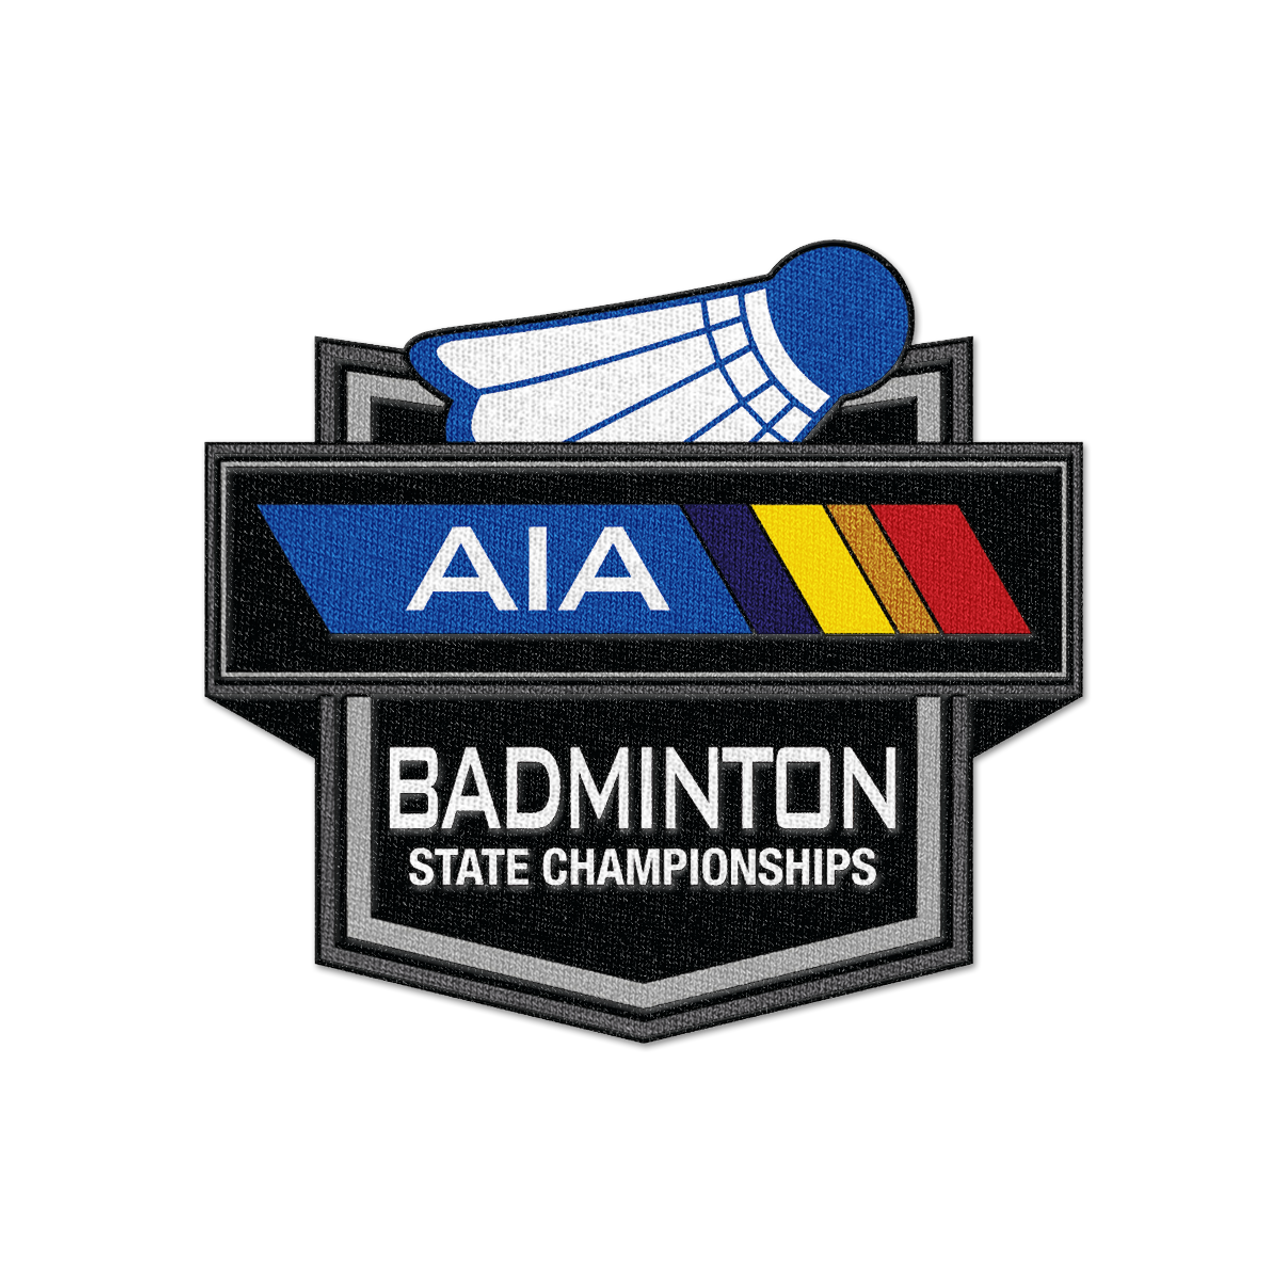 AIA Badminton Championships Patch